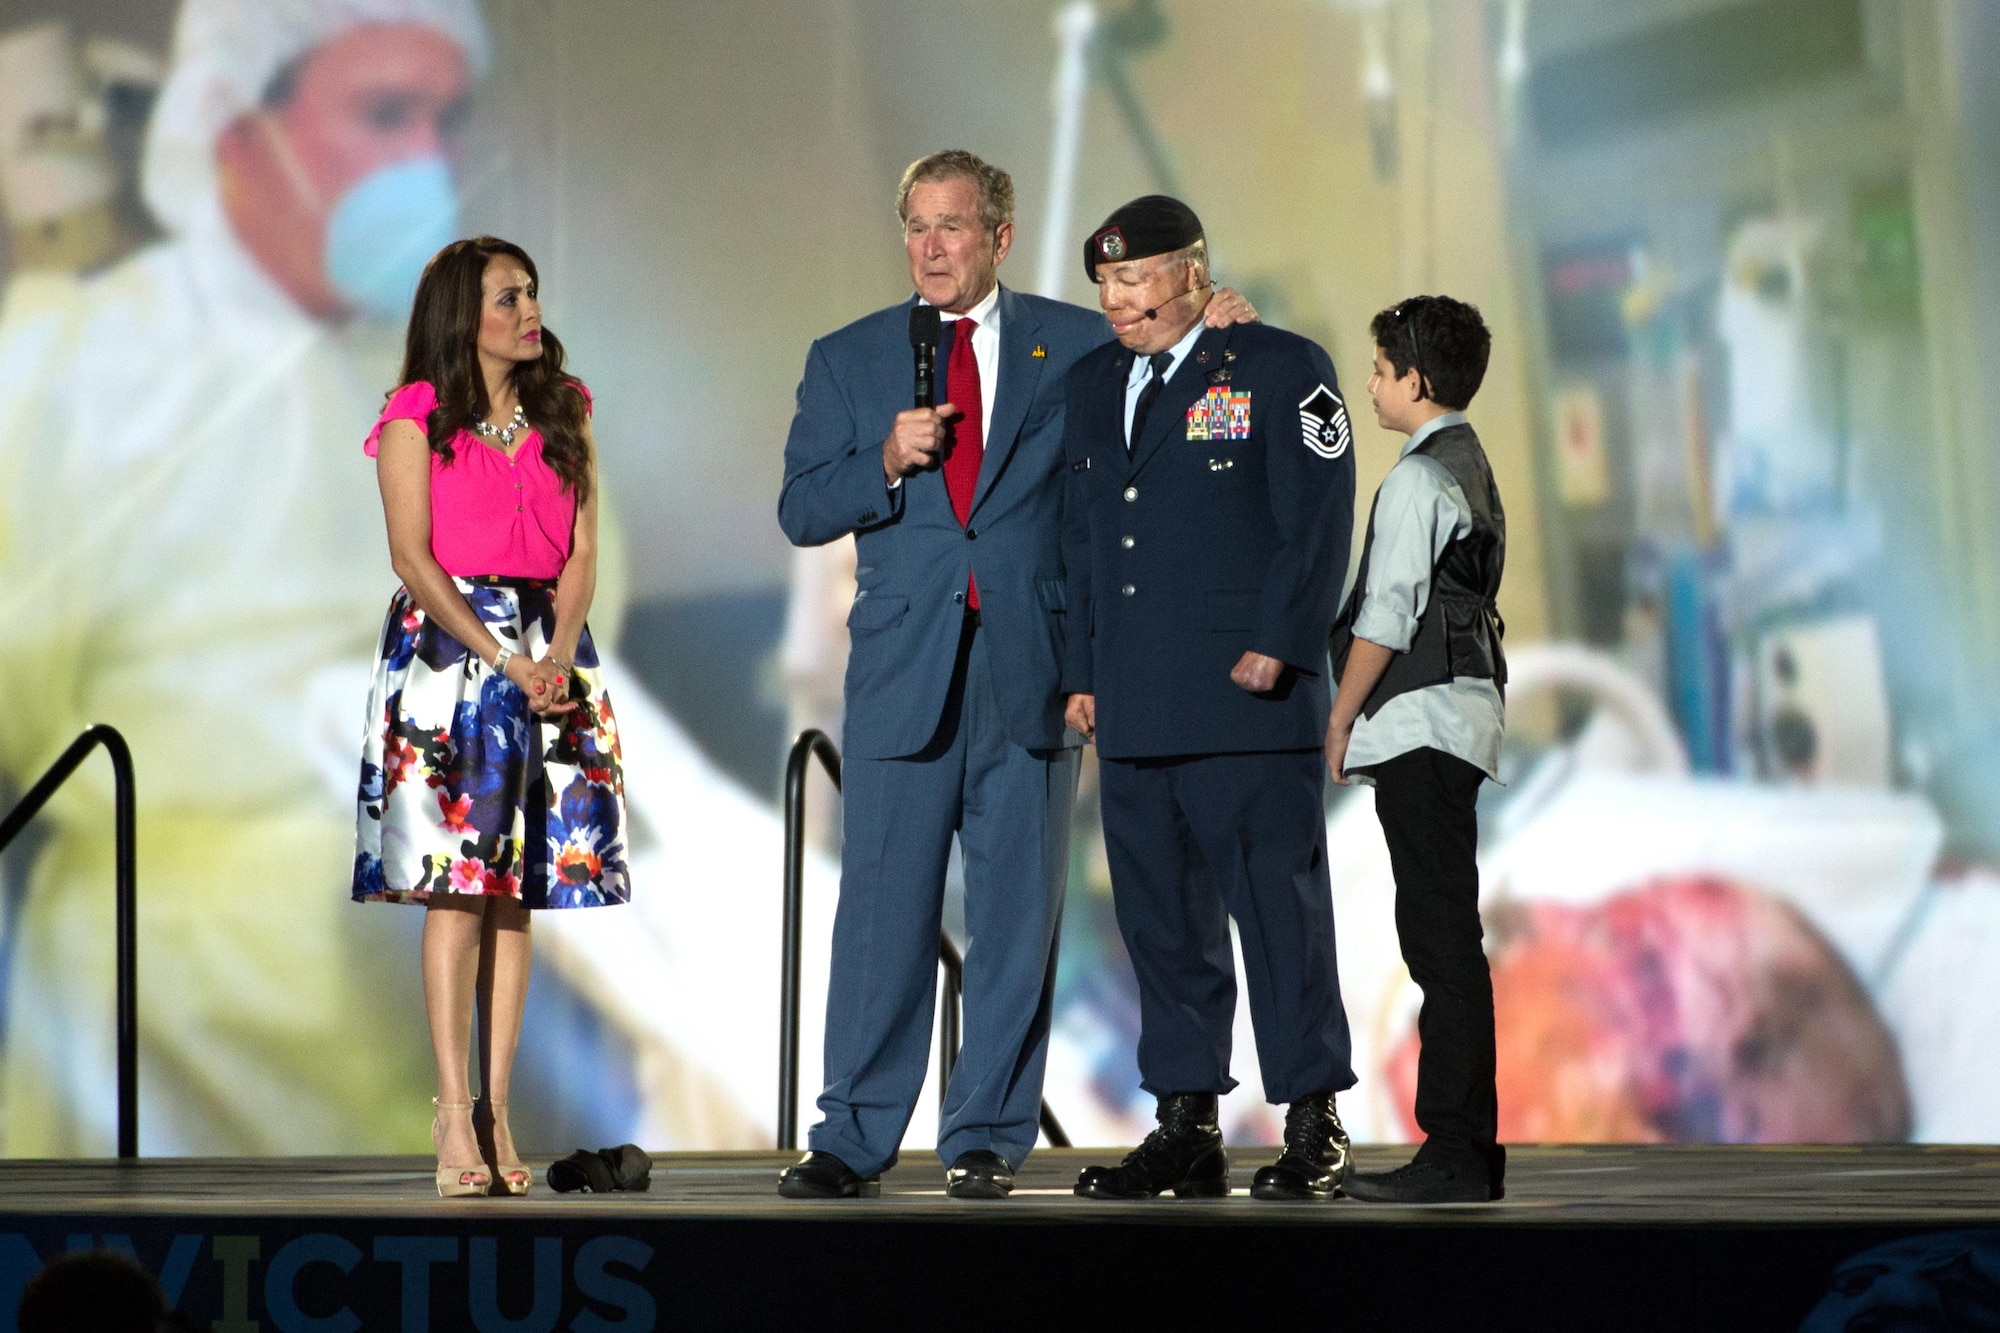 Former President George W. Bush stands on stage with Master Sgt. Israel Del Toro and his family and speaks during the opening ceremony of the 2016 Invictus games in Orlando, Fla., May 8, 2016. (DOD photo/EJ Hersom)